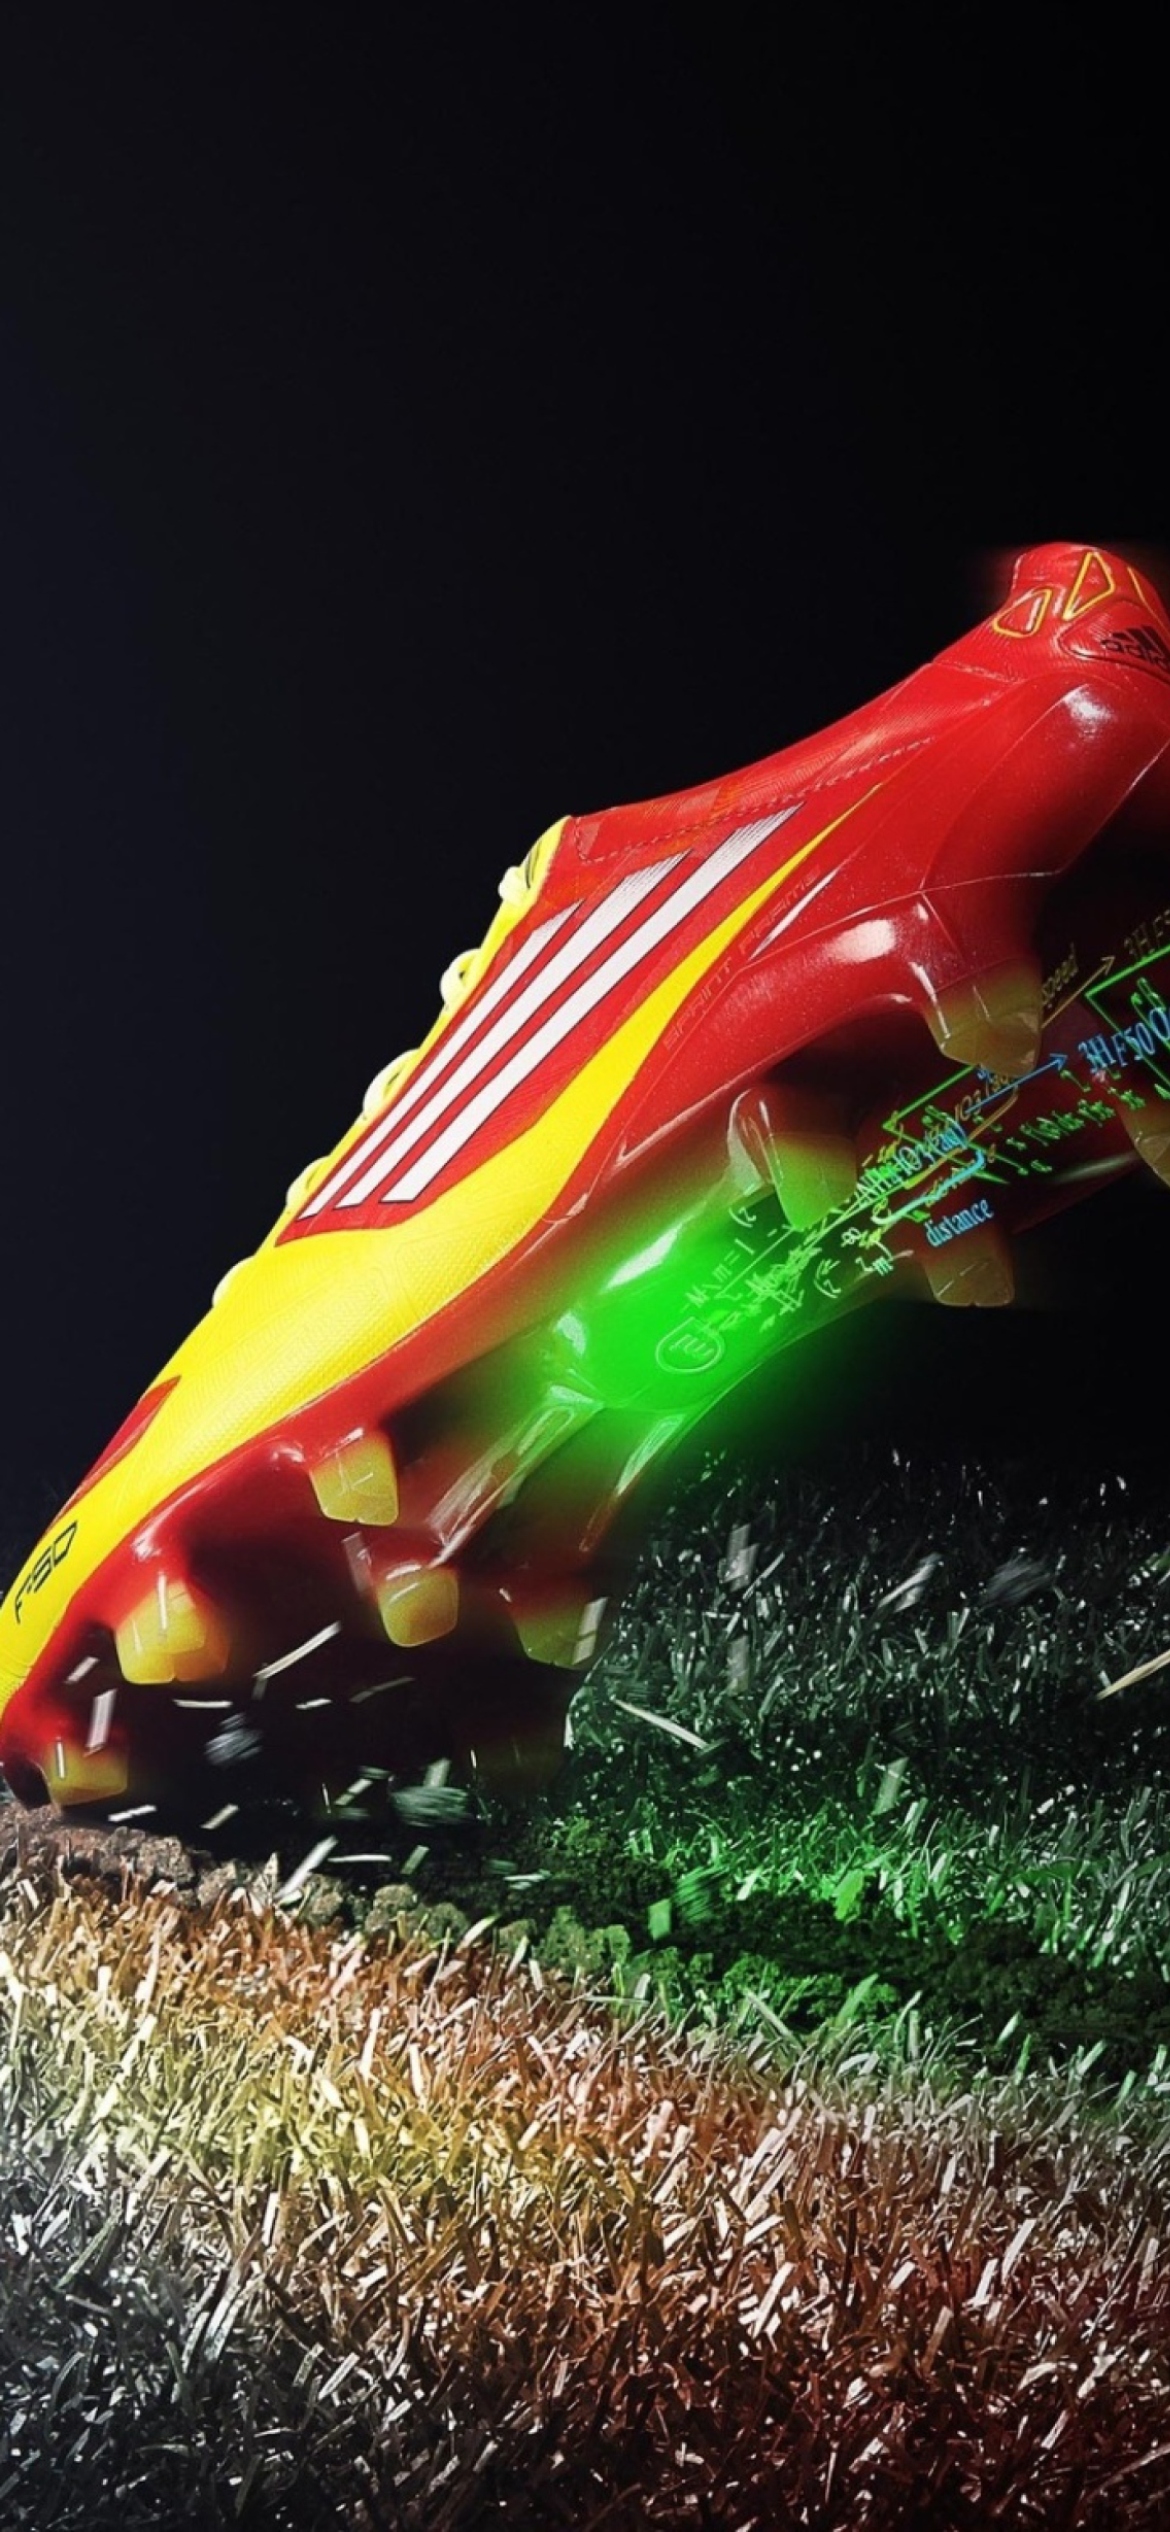 Adidas Football Shoe Wallpaper for iPhone 12 Pro